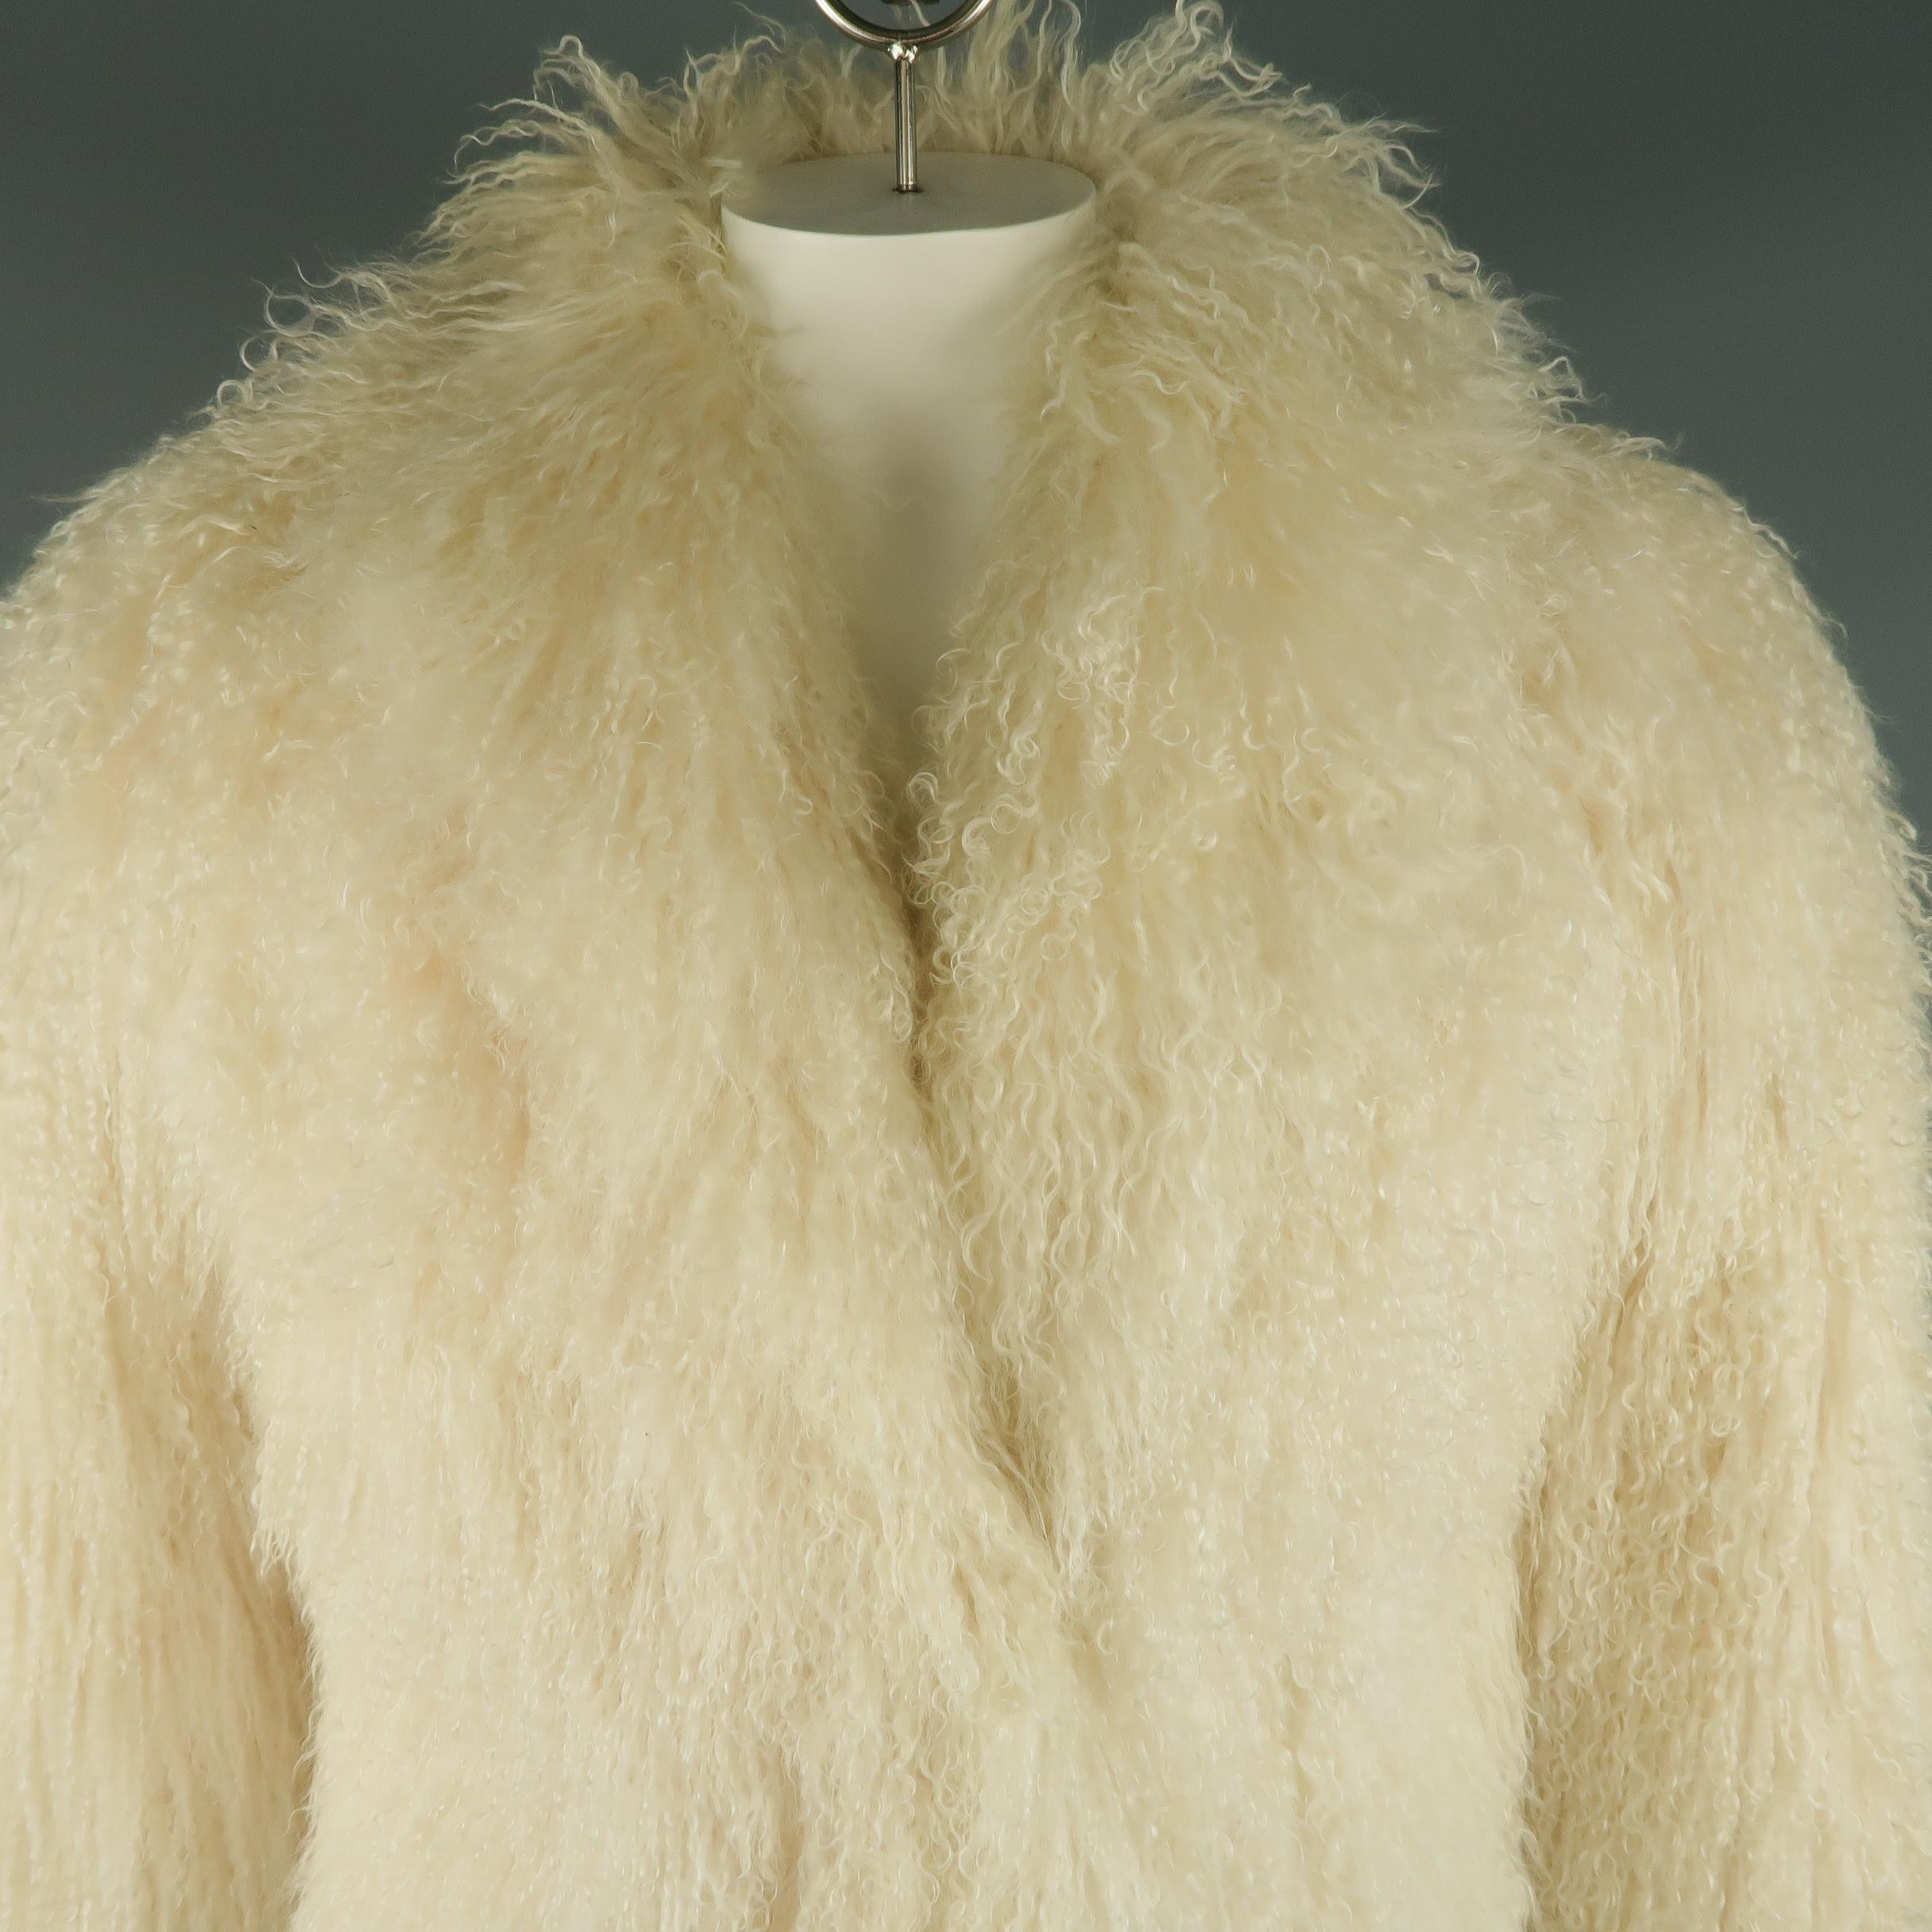 Vintage Mongolian lamb fur coat comes in a gorgeous light cream color with a round shawl collar, slit pockets, and asymmetrical single hook eye closure. Very minor wear.
 
Good Pre-Owned Condition.
Marked: S
 
Measurements:
 
Shoulder: 19 in.
Chest: